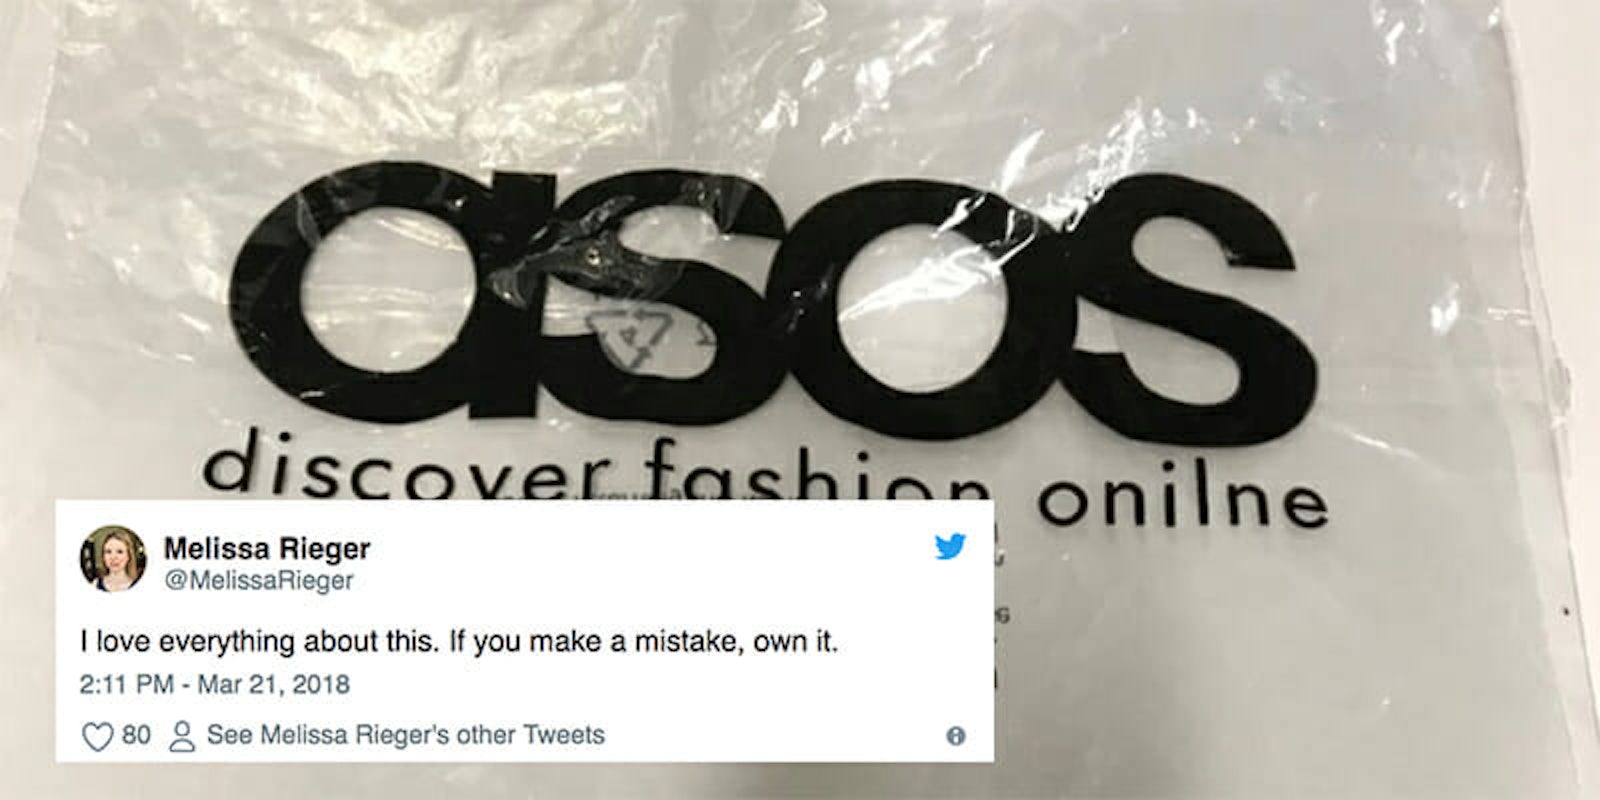 ASOS printed 17,000 bags with a typo, but the online retailer is owning the mistake.